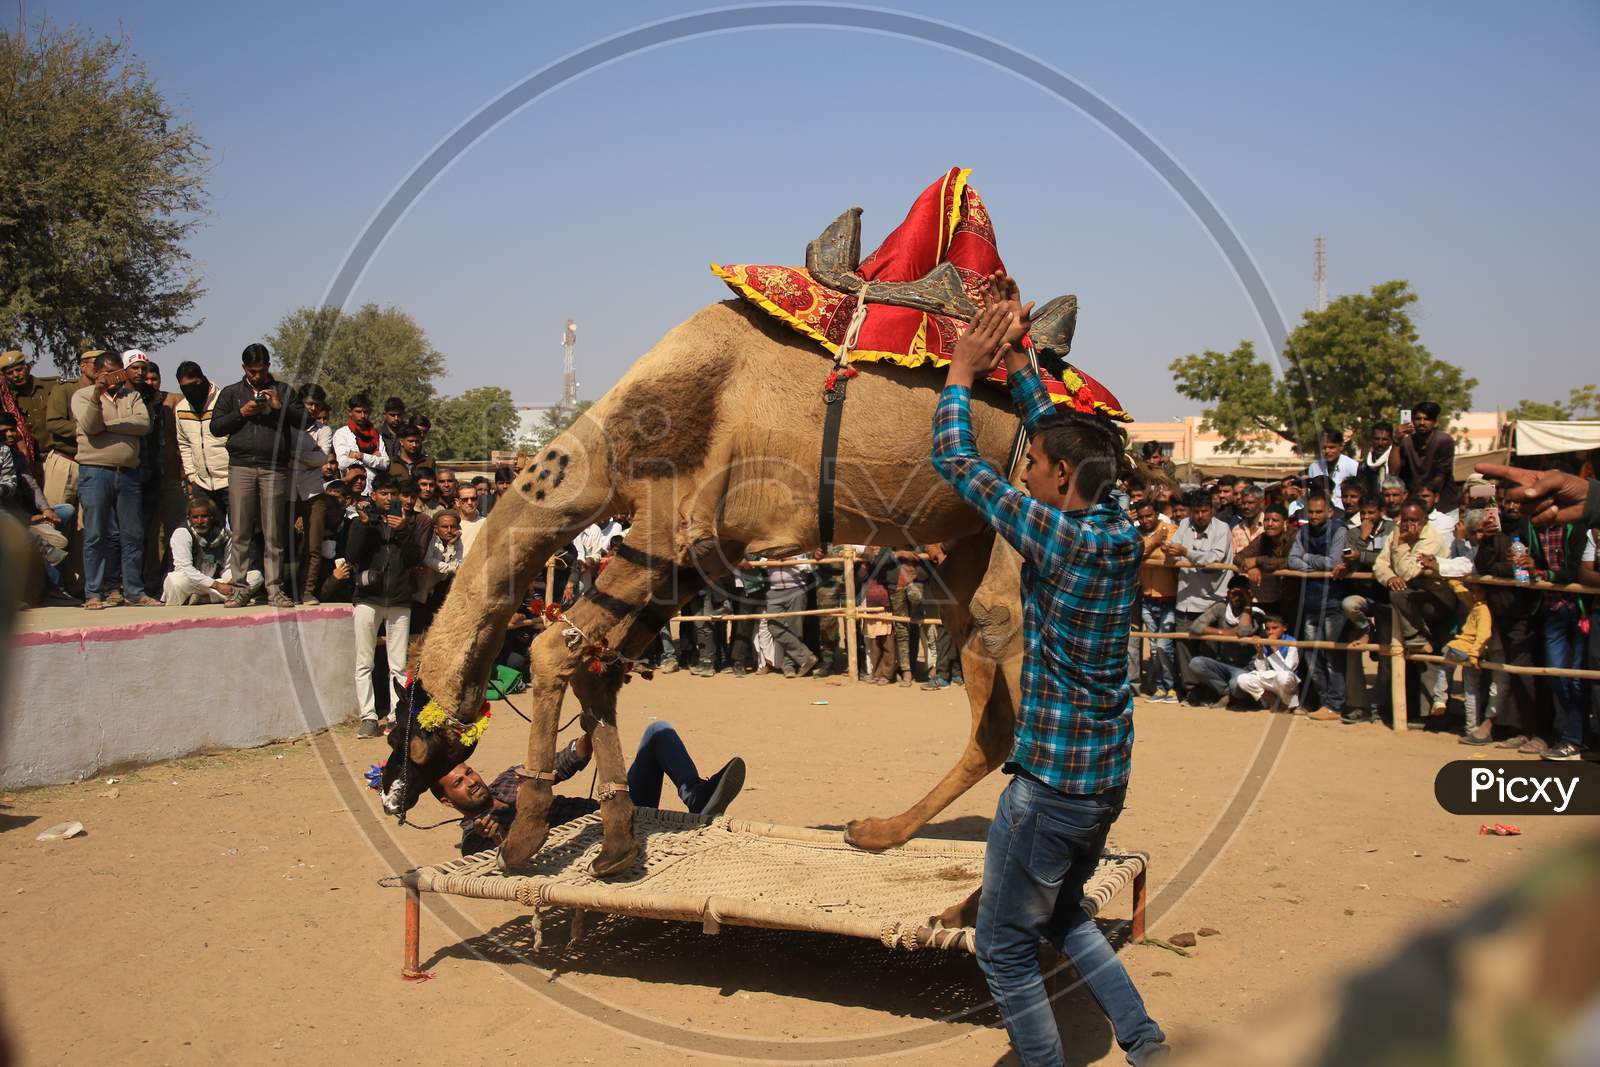 Nagaur Cattle Fair, Where Animals Like Camels, Cows, Horses And Bulls Are Brought To Be Sold Or Traded, In Nagaur District In The Desert State Of Rajasthan, India On 31 January 2020.